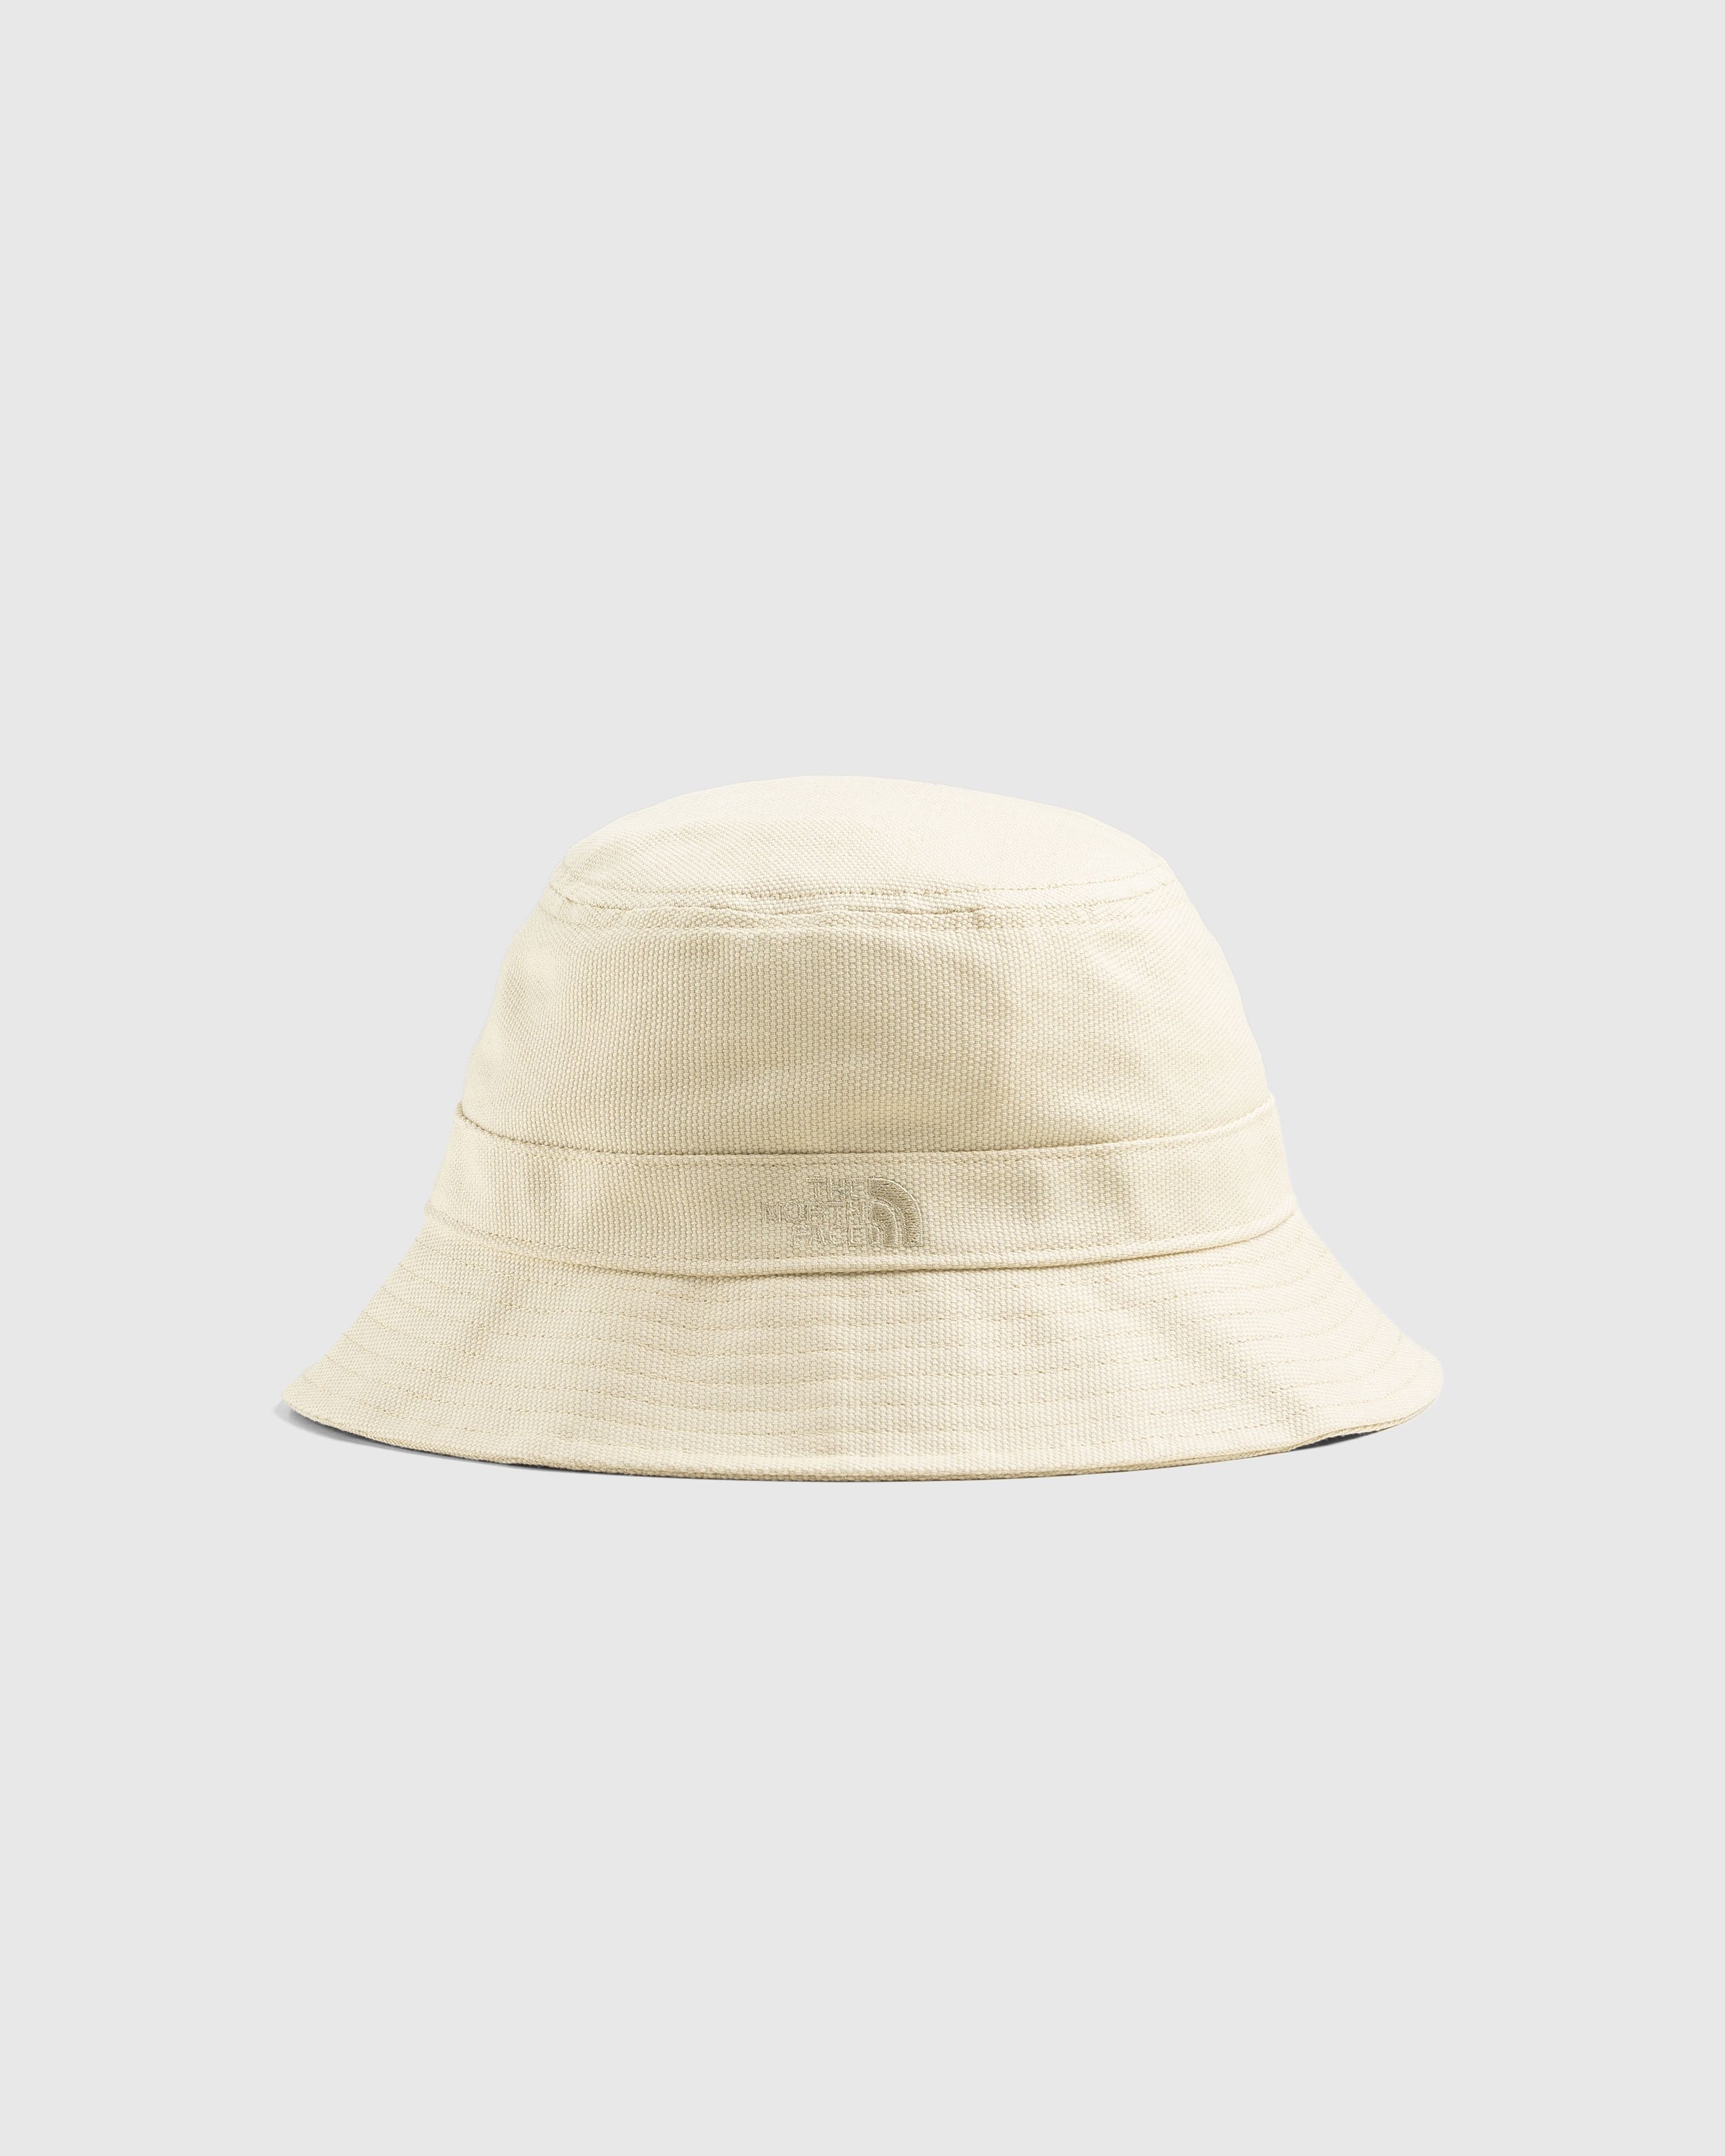 The North Face - Mountain Bucket Hat Gravel - Accessories - Beige - Image 1